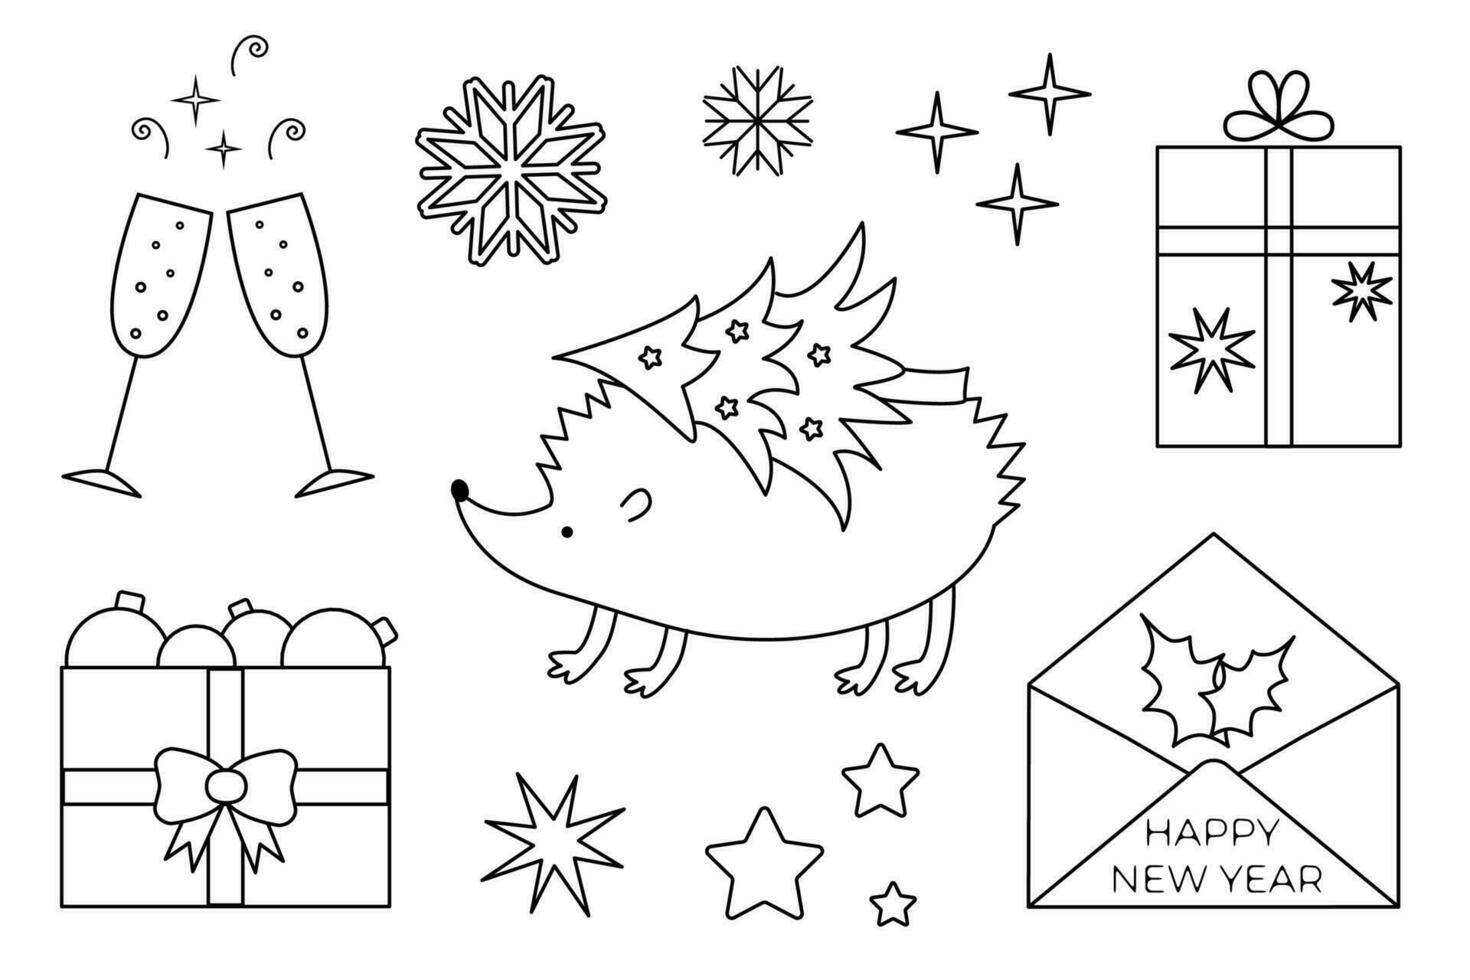 Christmas objects set. Line vector illustration. Drawing of hedgehog carrying Christmas tree on back. Holiday decoration, champagne glasses, gift box and envelope. Happy New Year greeting text design.